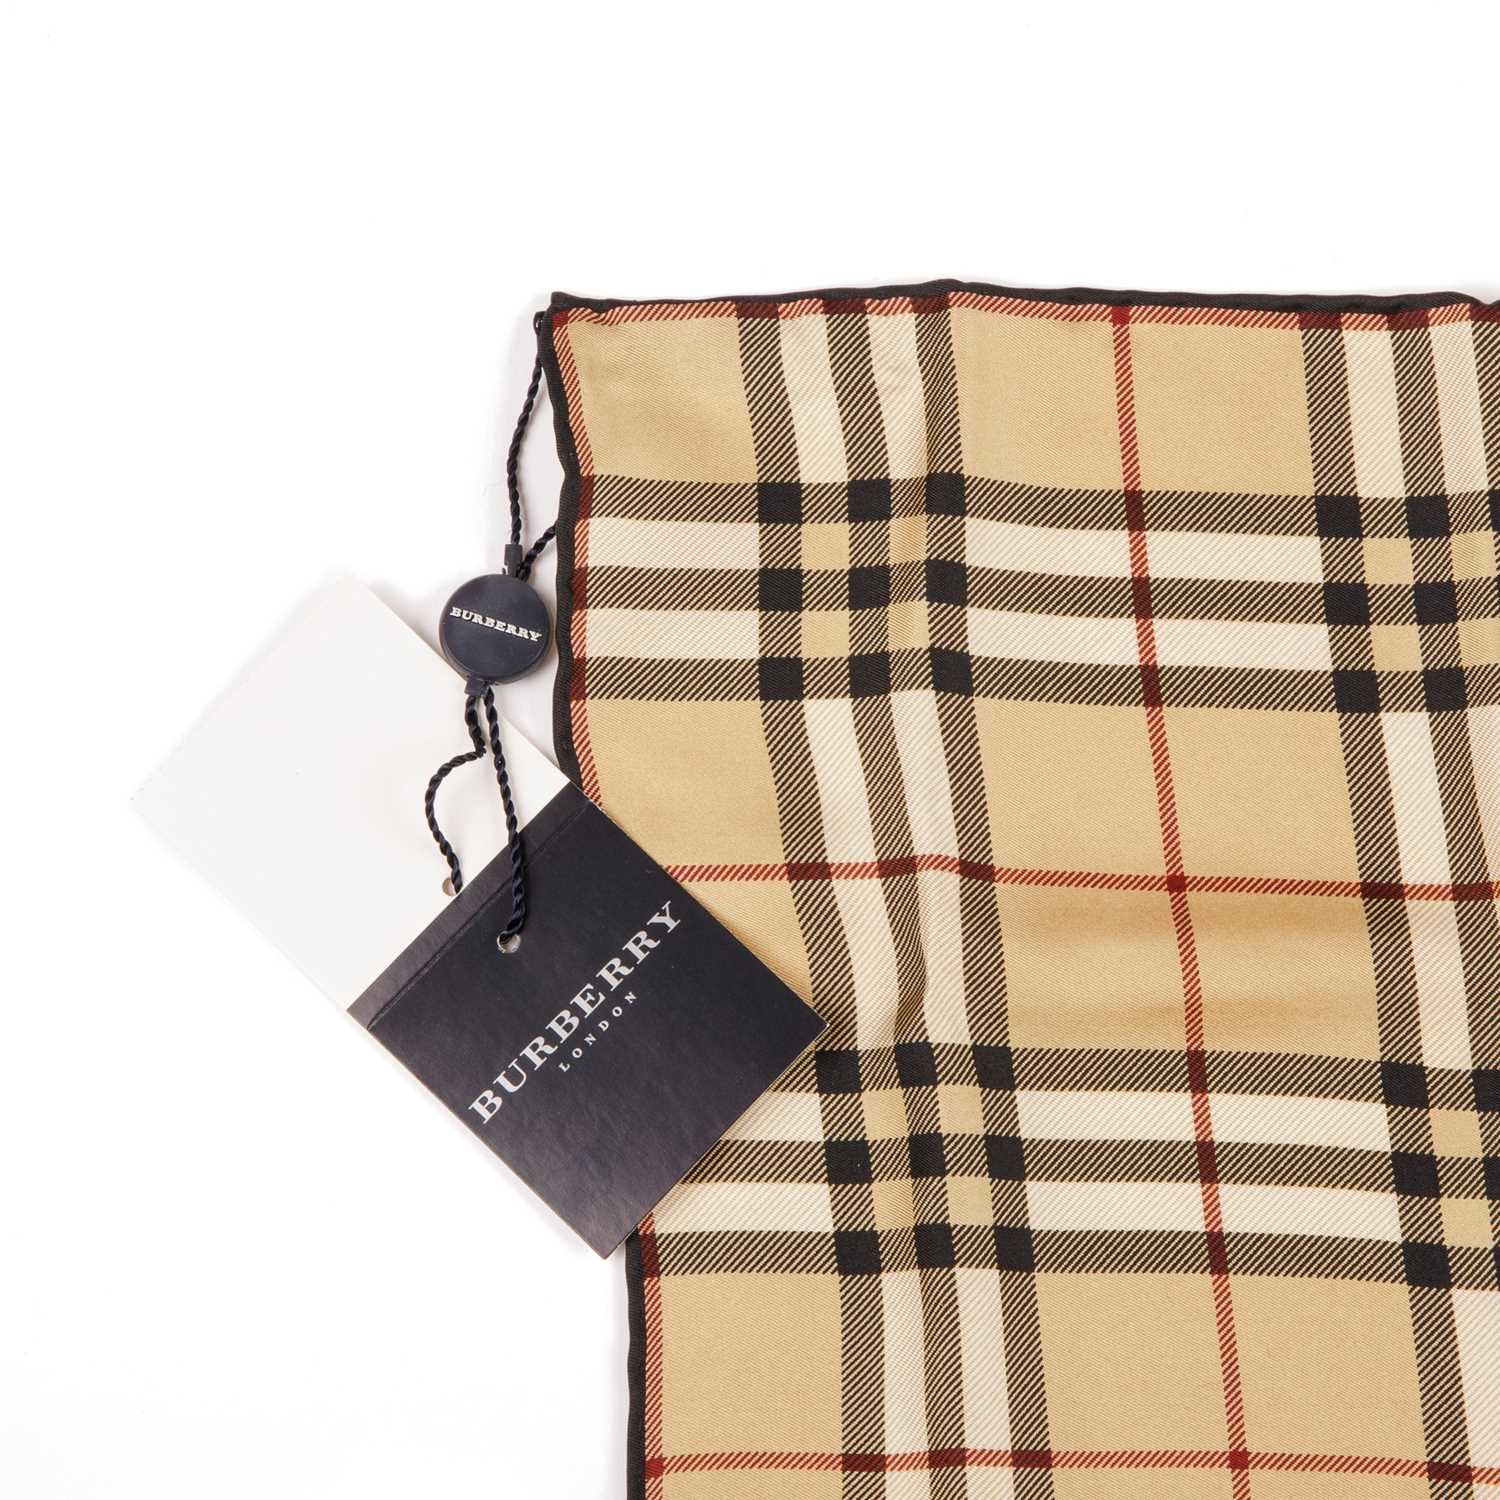 Burberry, two Nova Check silk handkerchiefs, with hand-rolled edges, measuring 47 by 47cm, with - Image 6 of 6